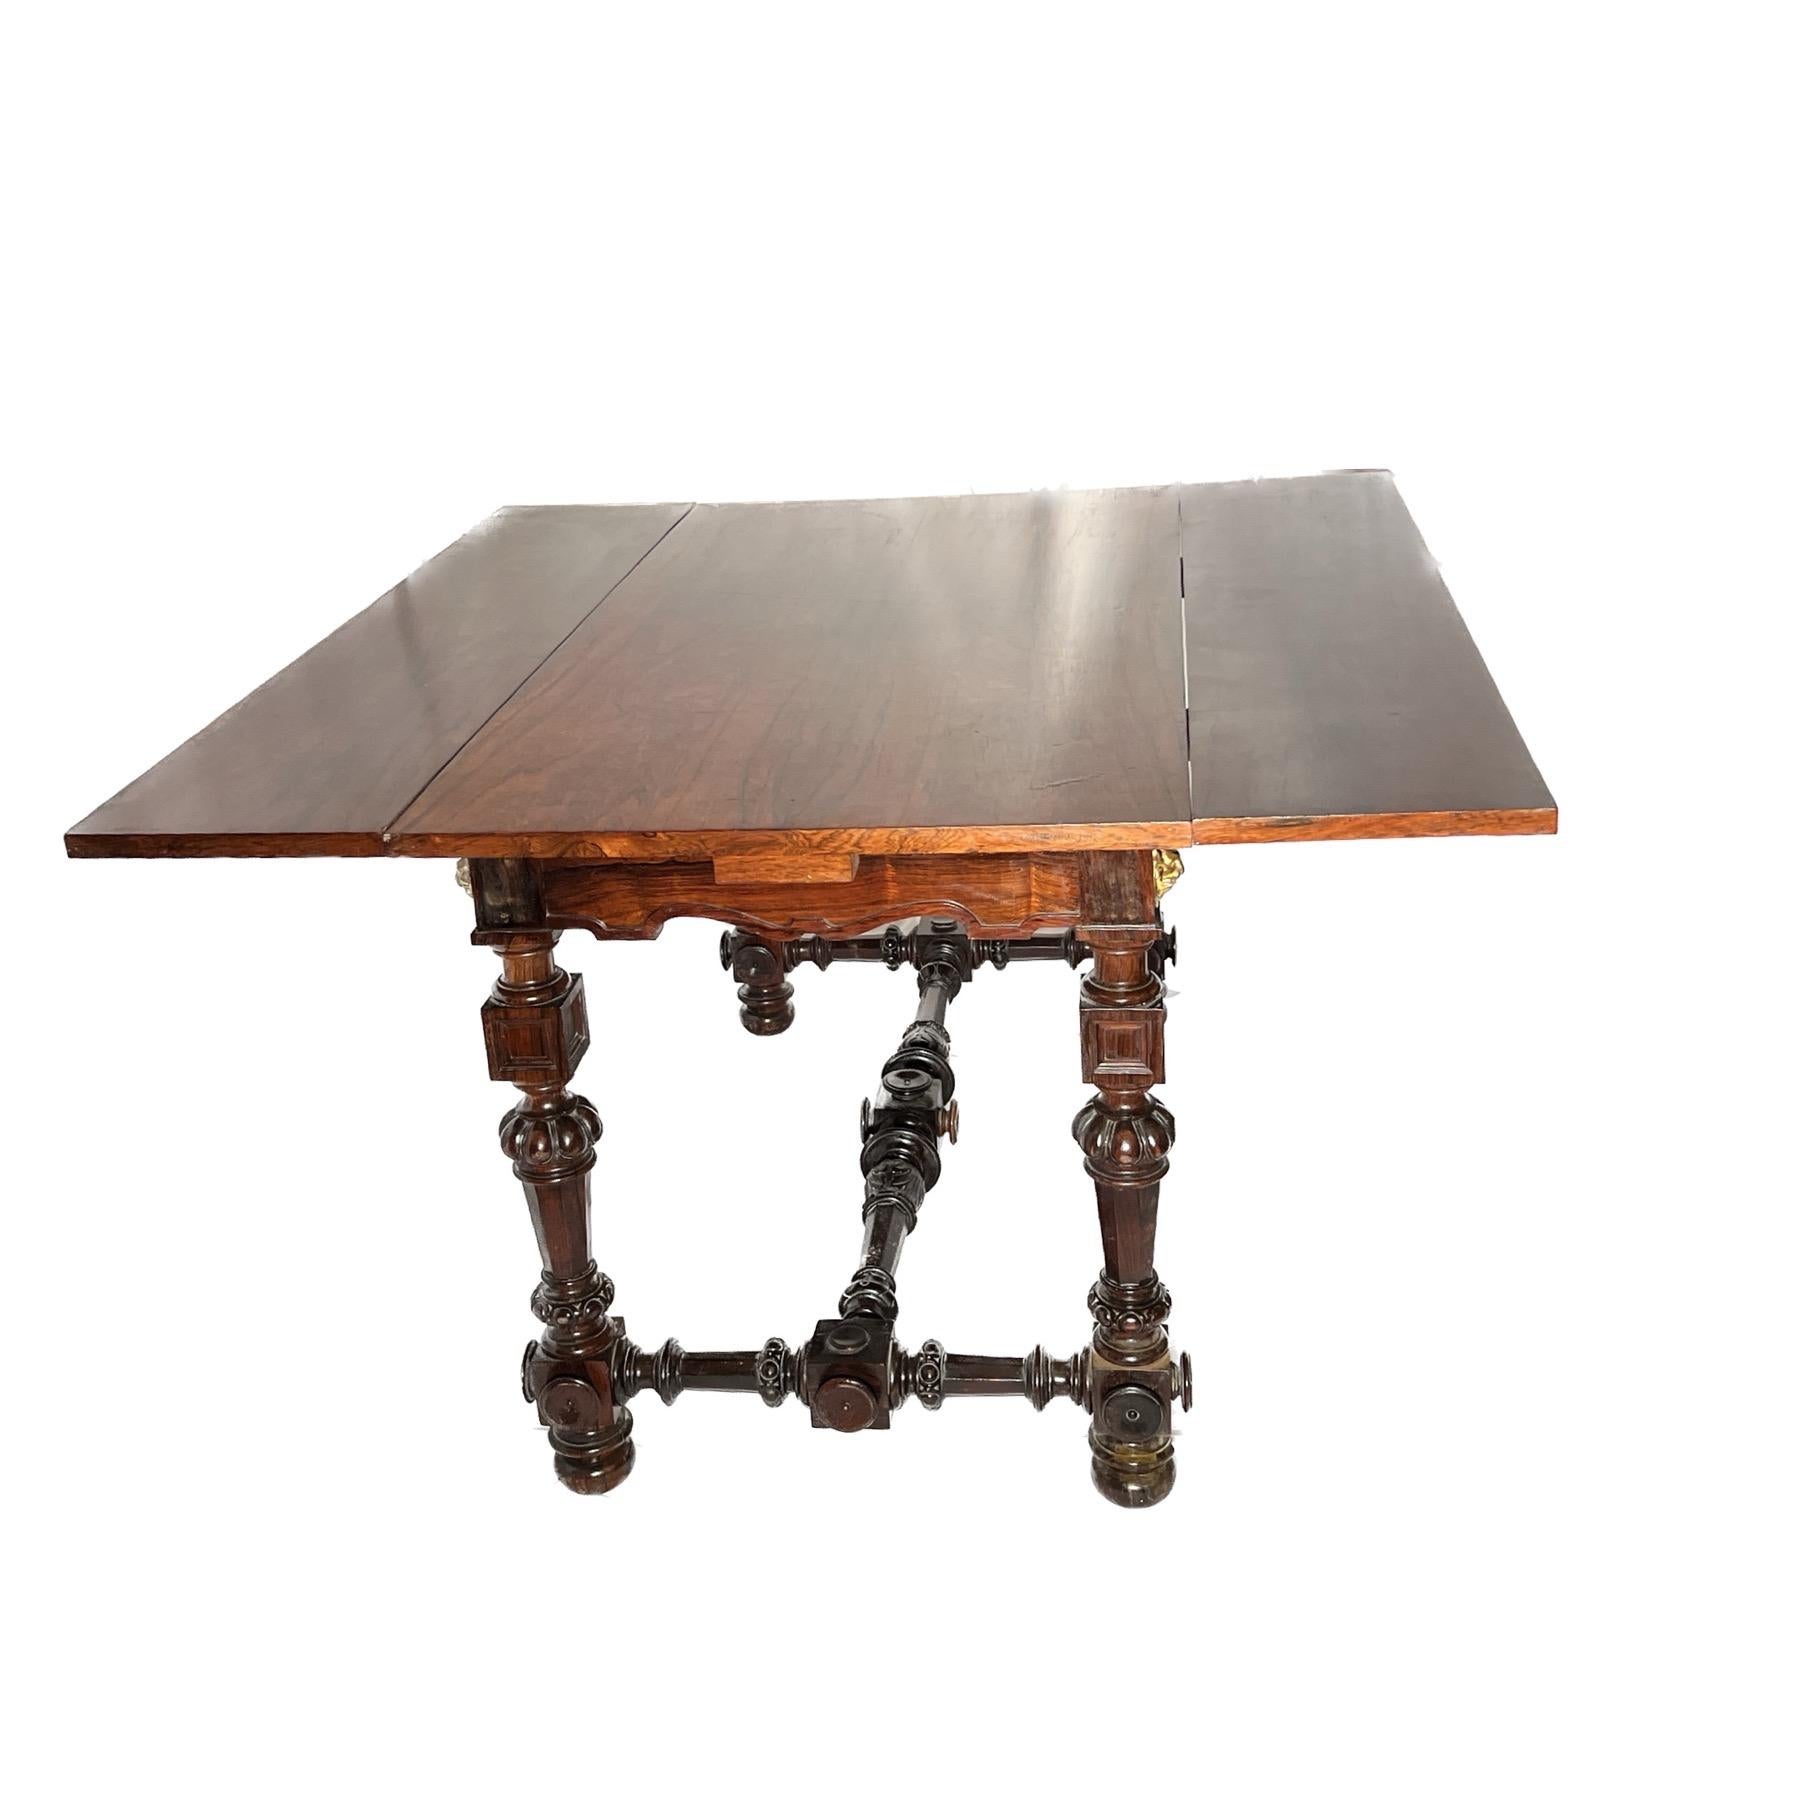 Antique Portuguese Rosewood Drawleaf Table
This table opens to 48.5 inches 
